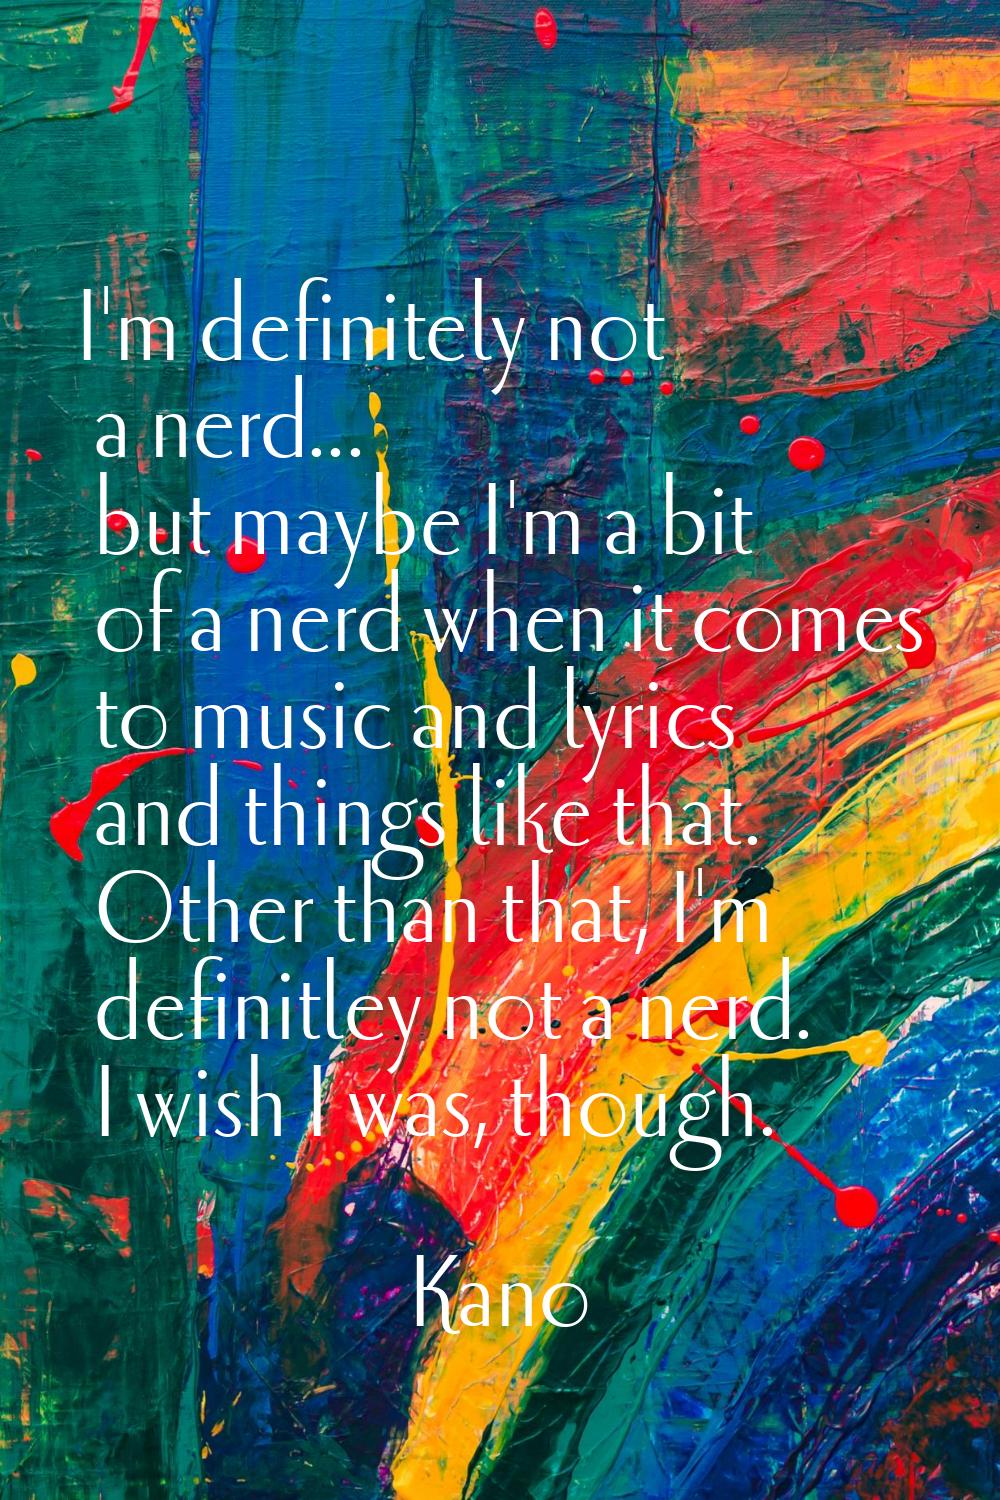 I'm definitely not a nerd... but maybe I'm a bit of a nerd when it comes to music and lyrics and th